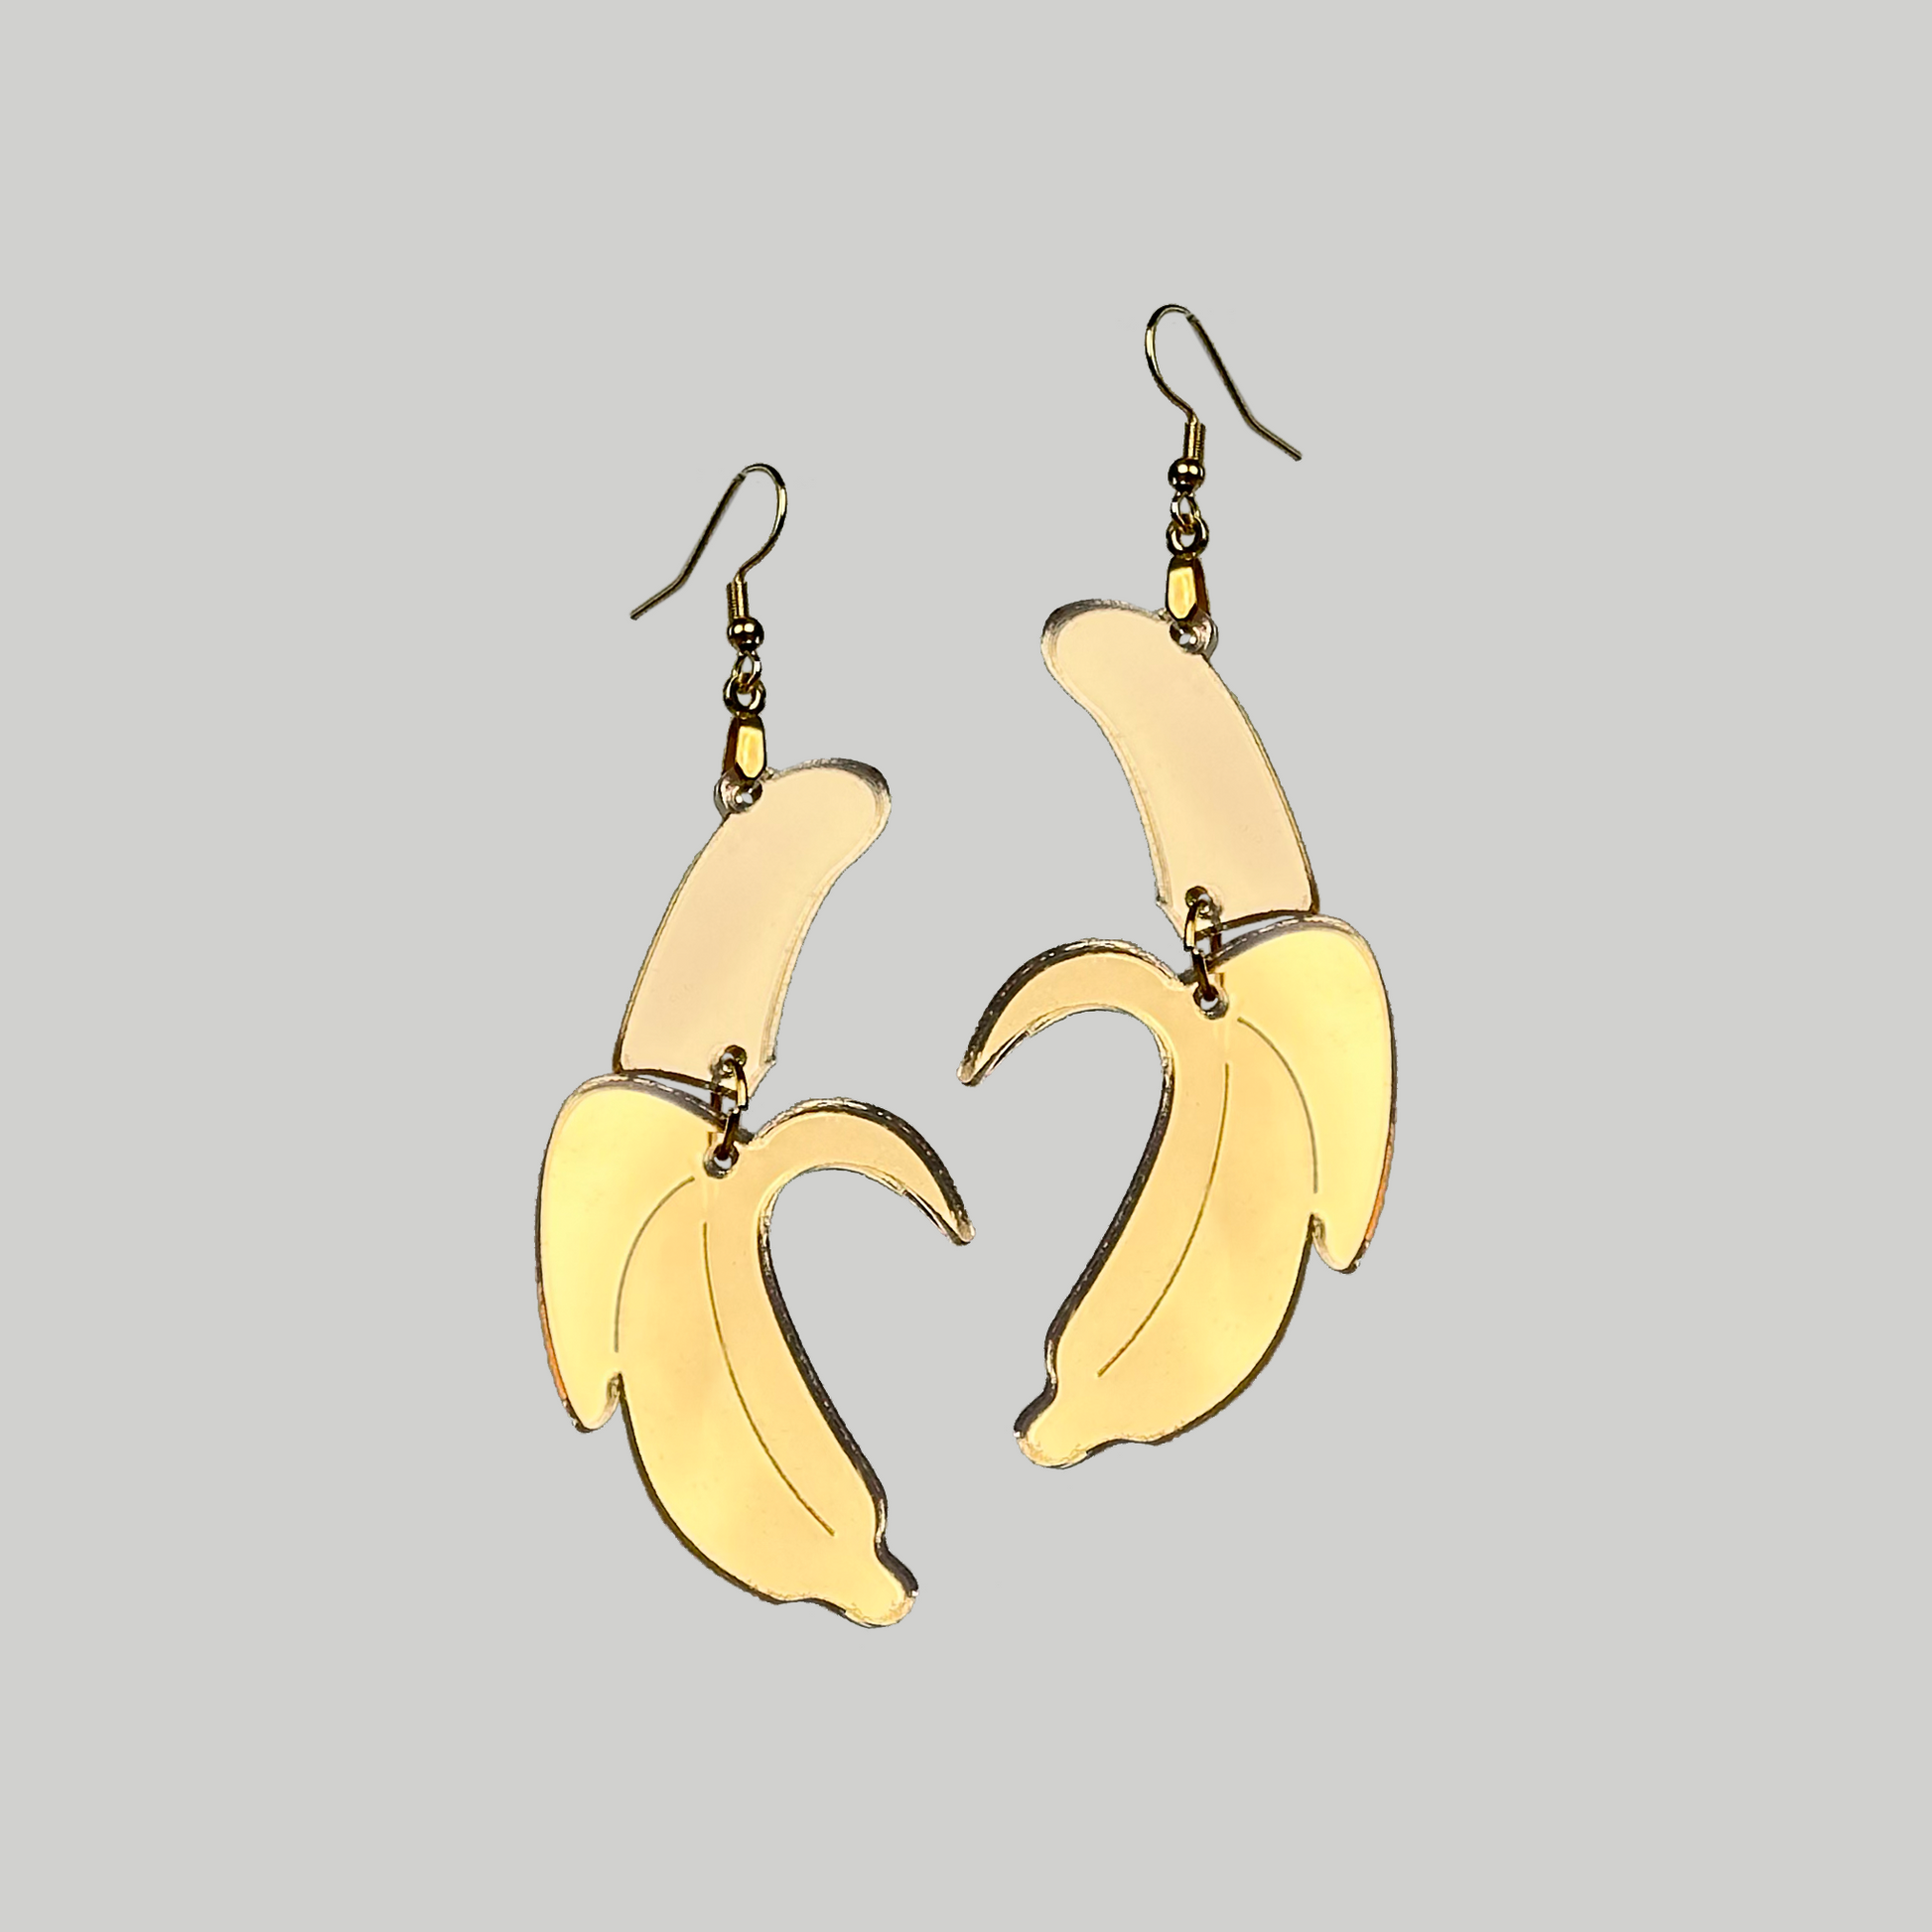 Banana Earrings: Playful and tropical, these banana-shaped earrings add a touch of fun to your accessory collection.